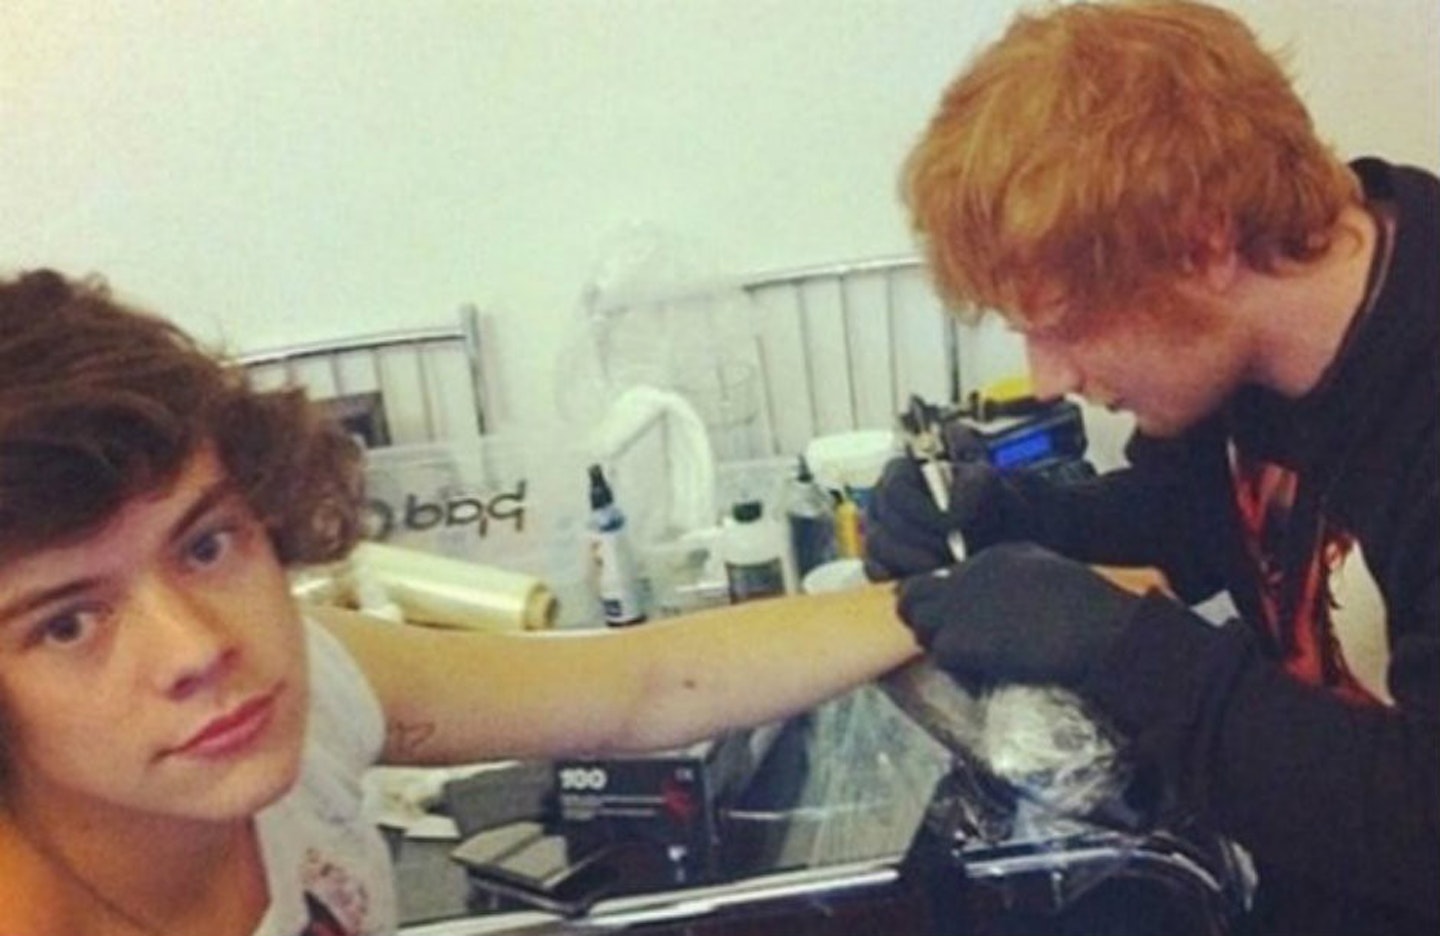 They're that close, Harry let Ed tattoo him